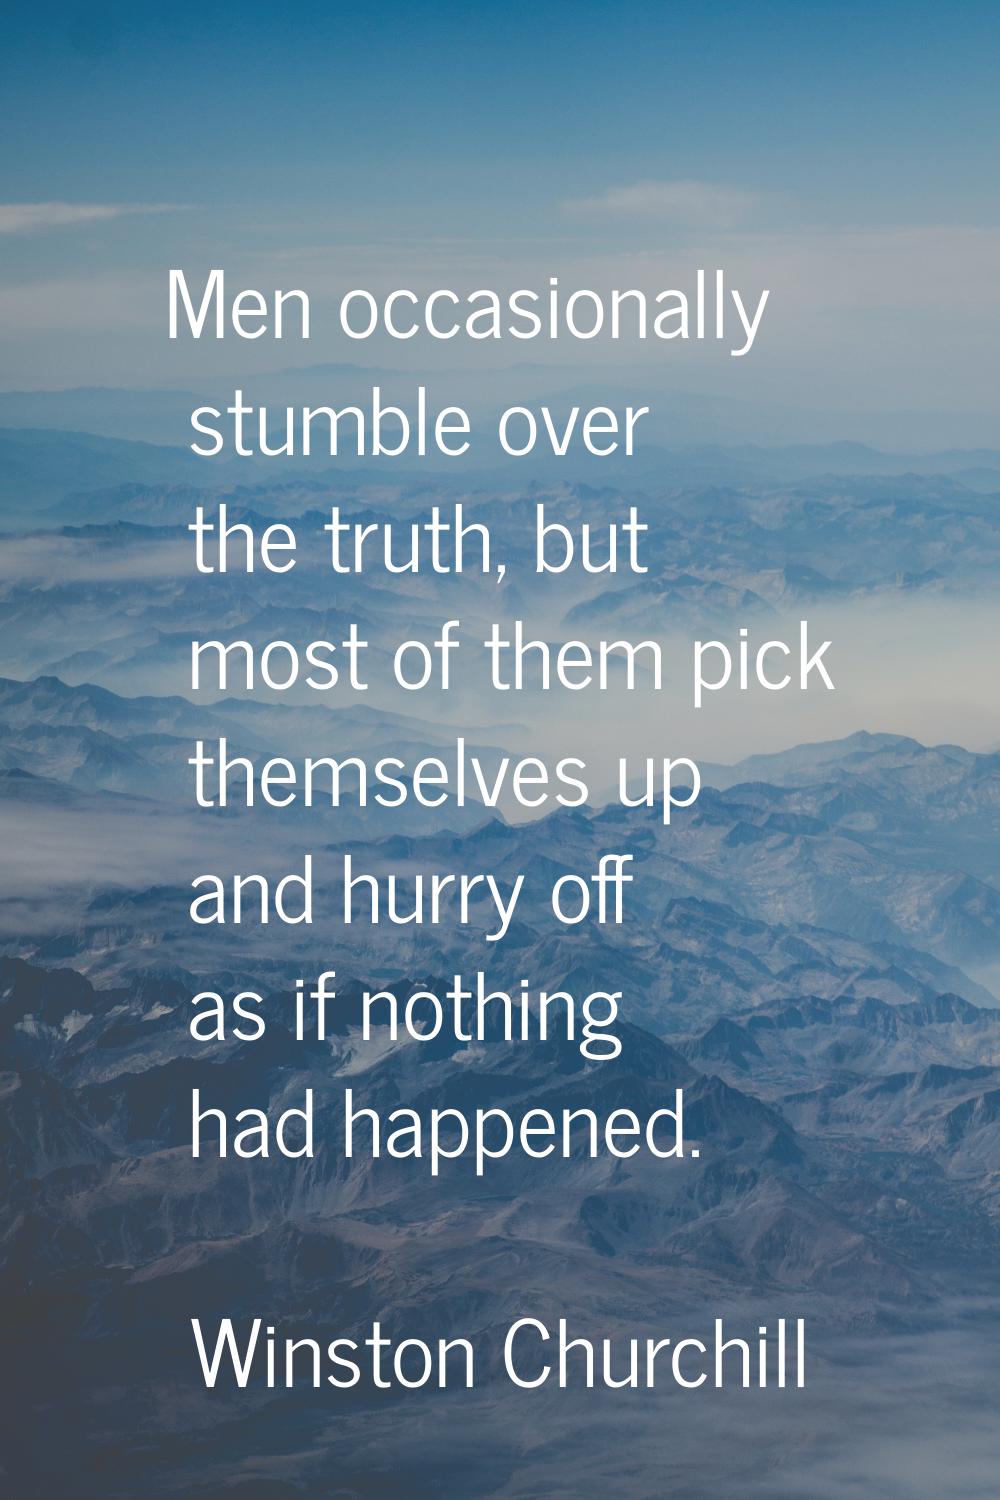 Men occasionally stumble over the truth, but most of them pick themselves up and hurry off as if no